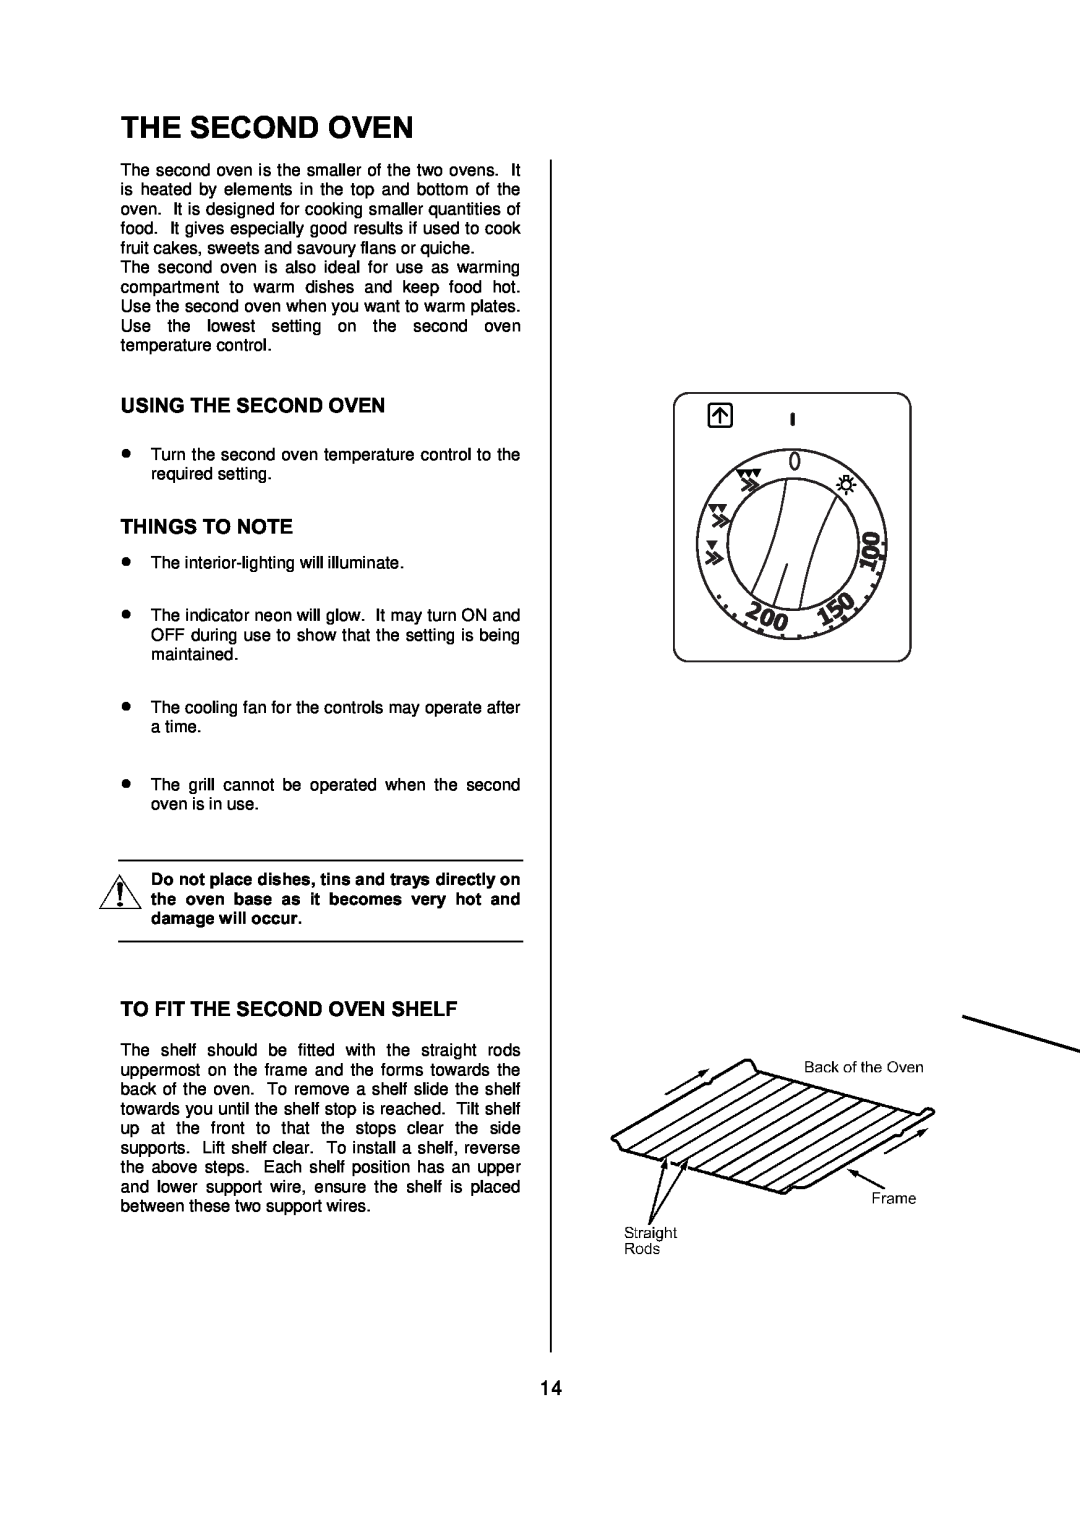 Electrolux D77000 user manual Using The Second Oven, To Fit The Second Oven Shelf, Things To Note 